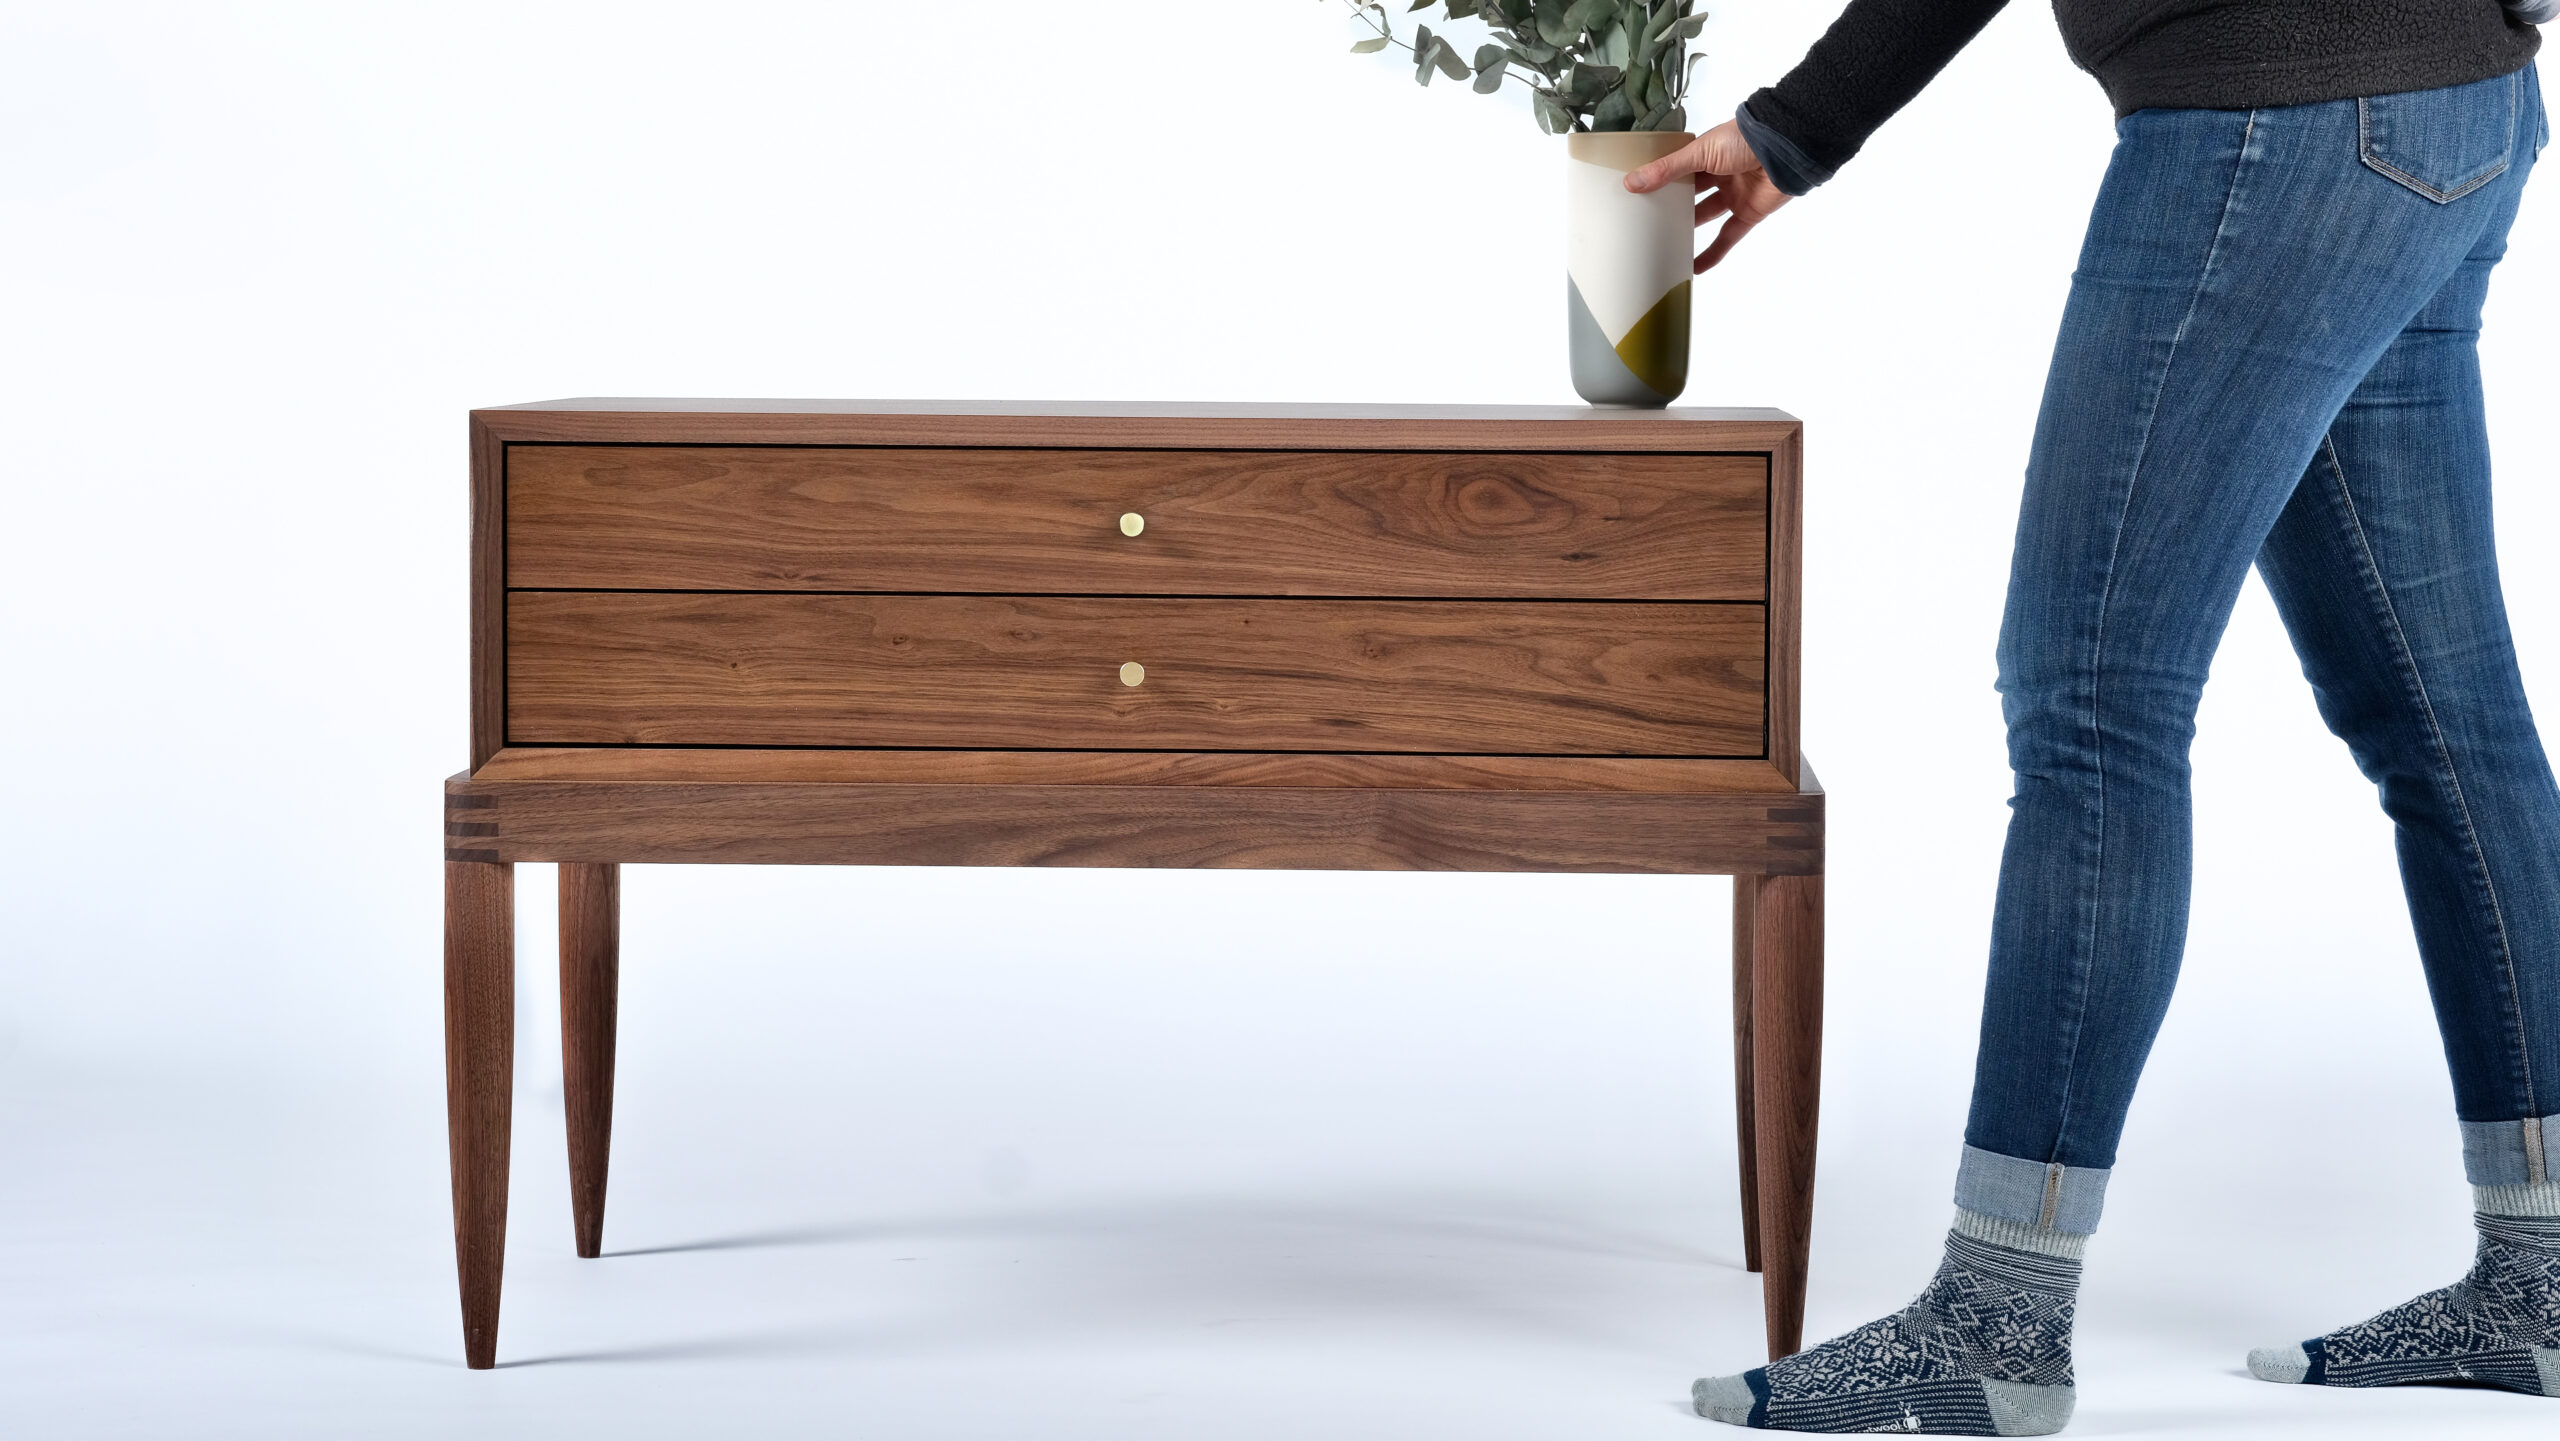 A solid wood nightstand made of walnut with two shallow drawers and round brass pulls. Someone is setting a vase on top.